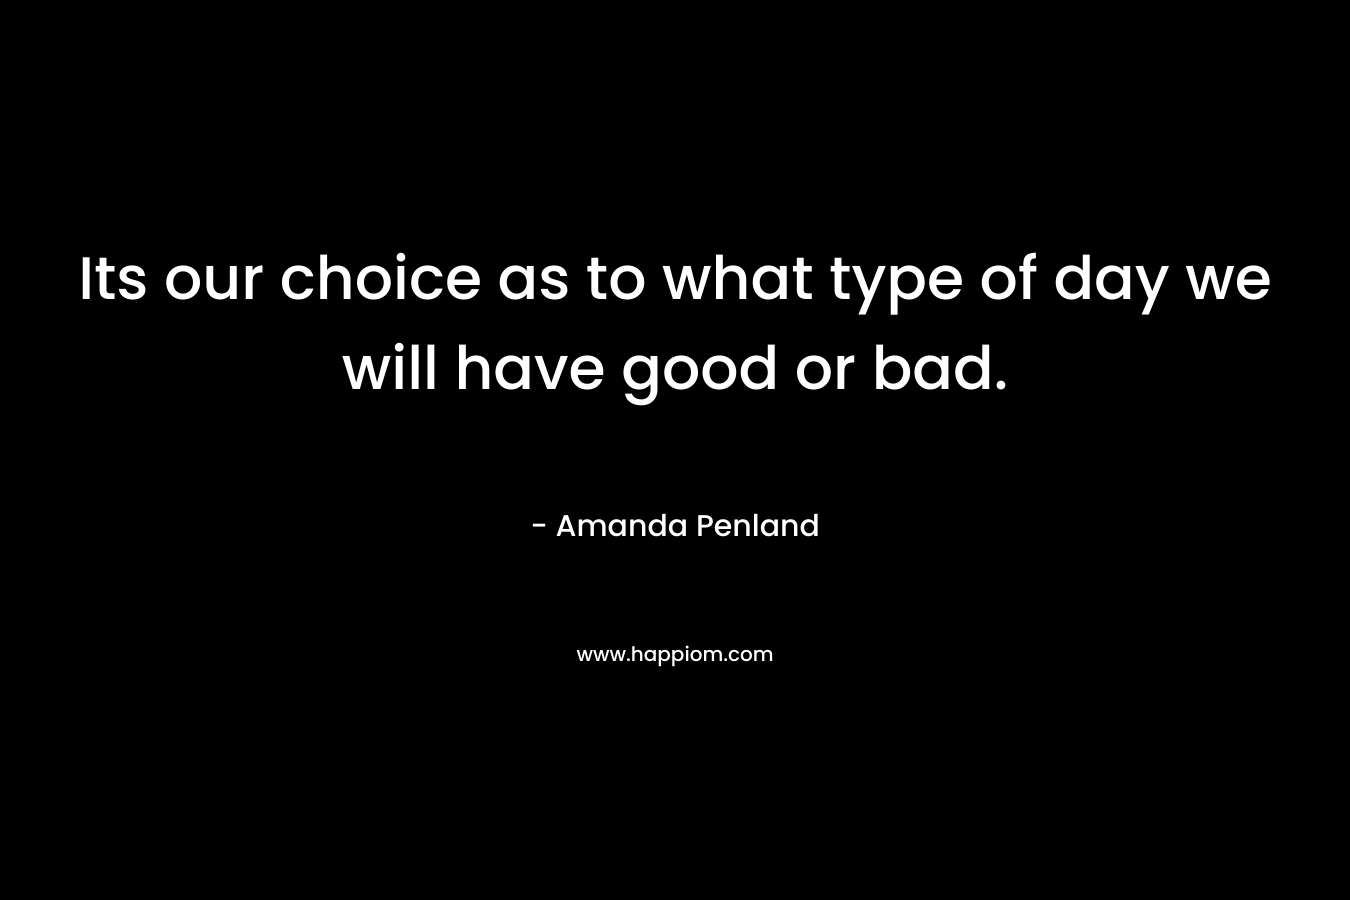 Its our choice as to what type of day we will have good or bad.